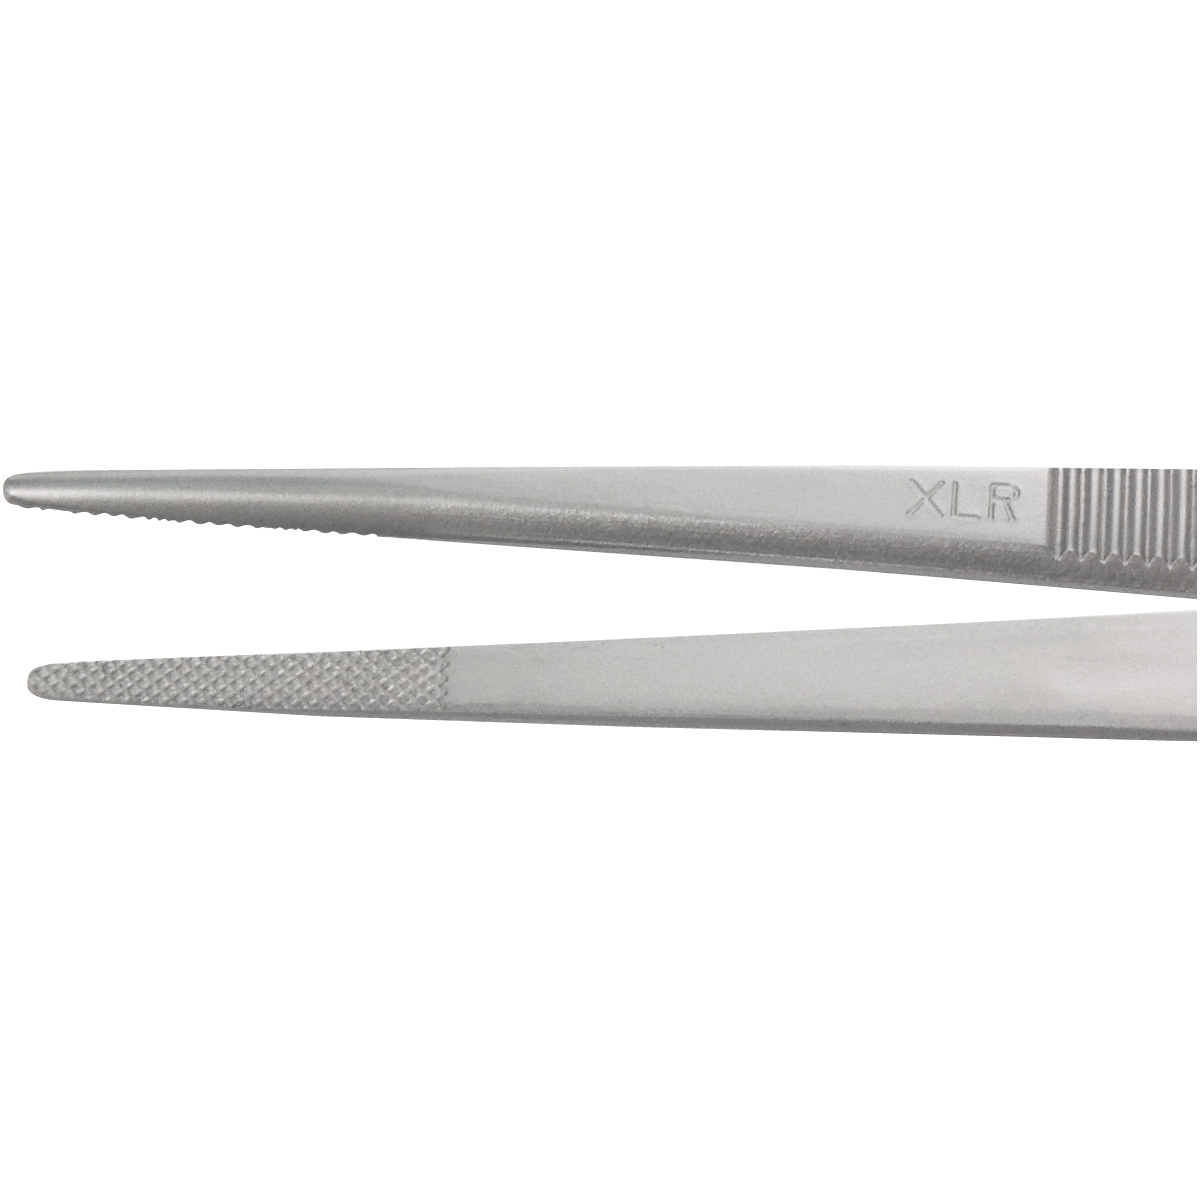 Tweezers with serrated grips and tips with extra large tips, locking-System, length 160 mm